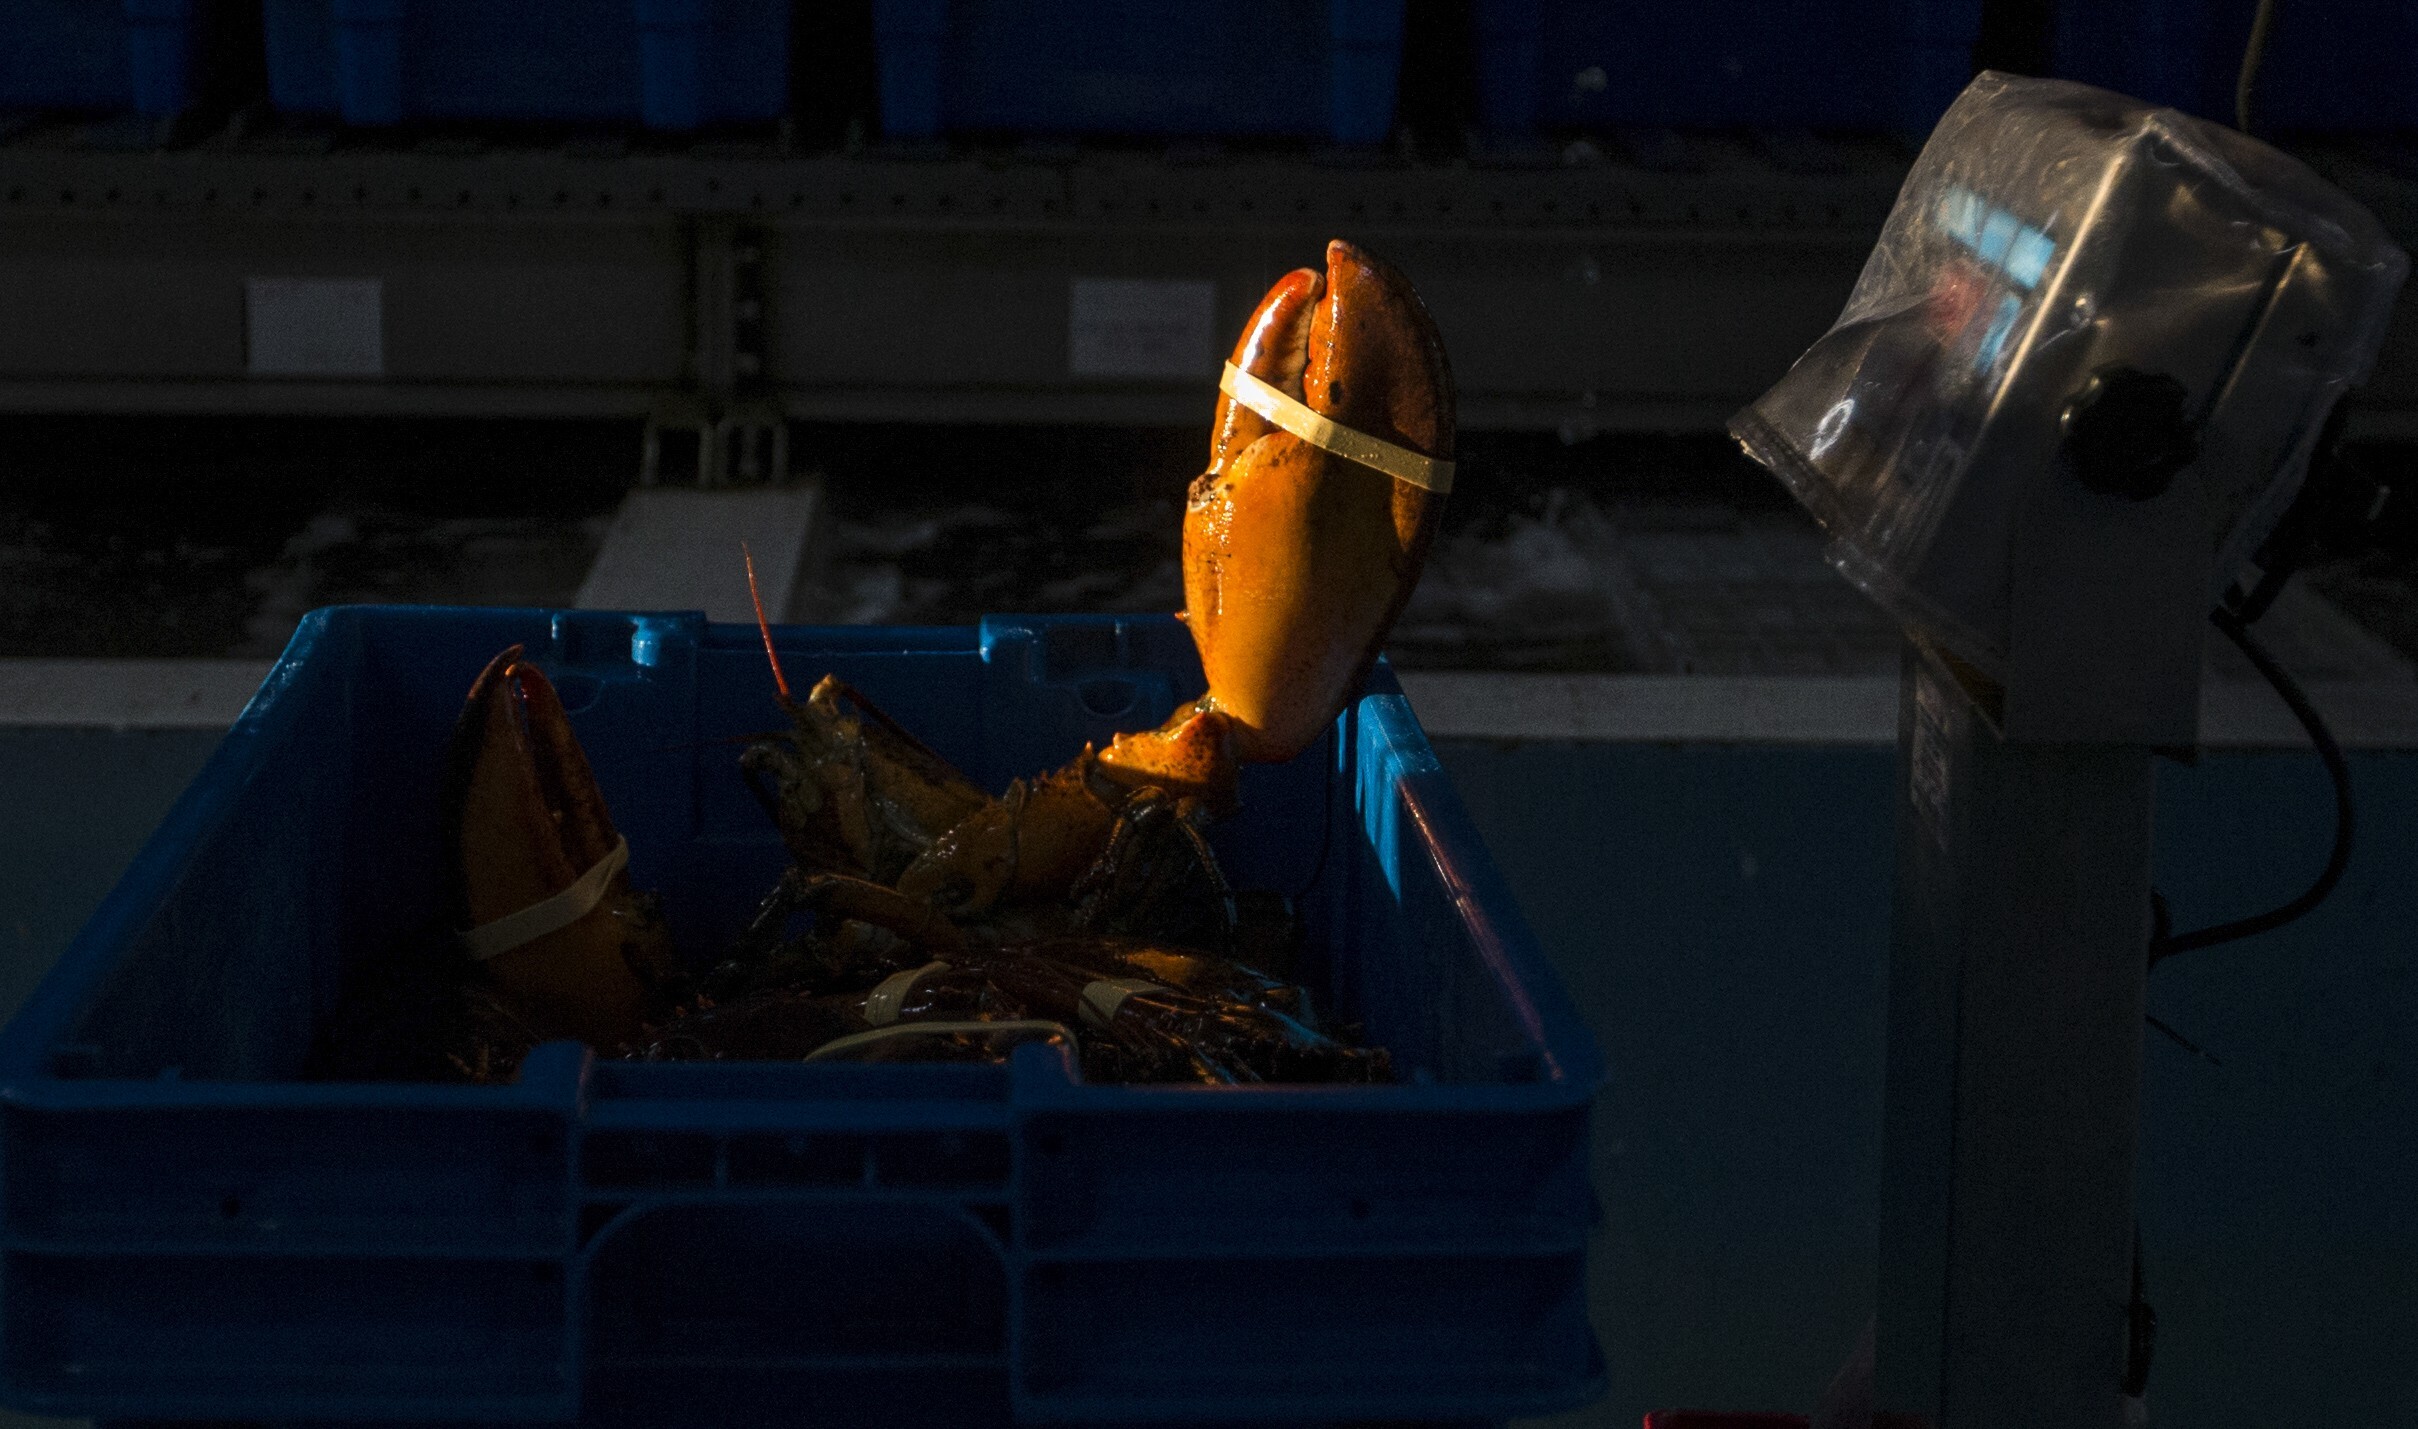 WWF-Hong Kong says that although the Boston lobster is not threatened with extinction, its harvesting ground overlaps with the habitat of the North Atlantic right whale. Photo: Getty Images